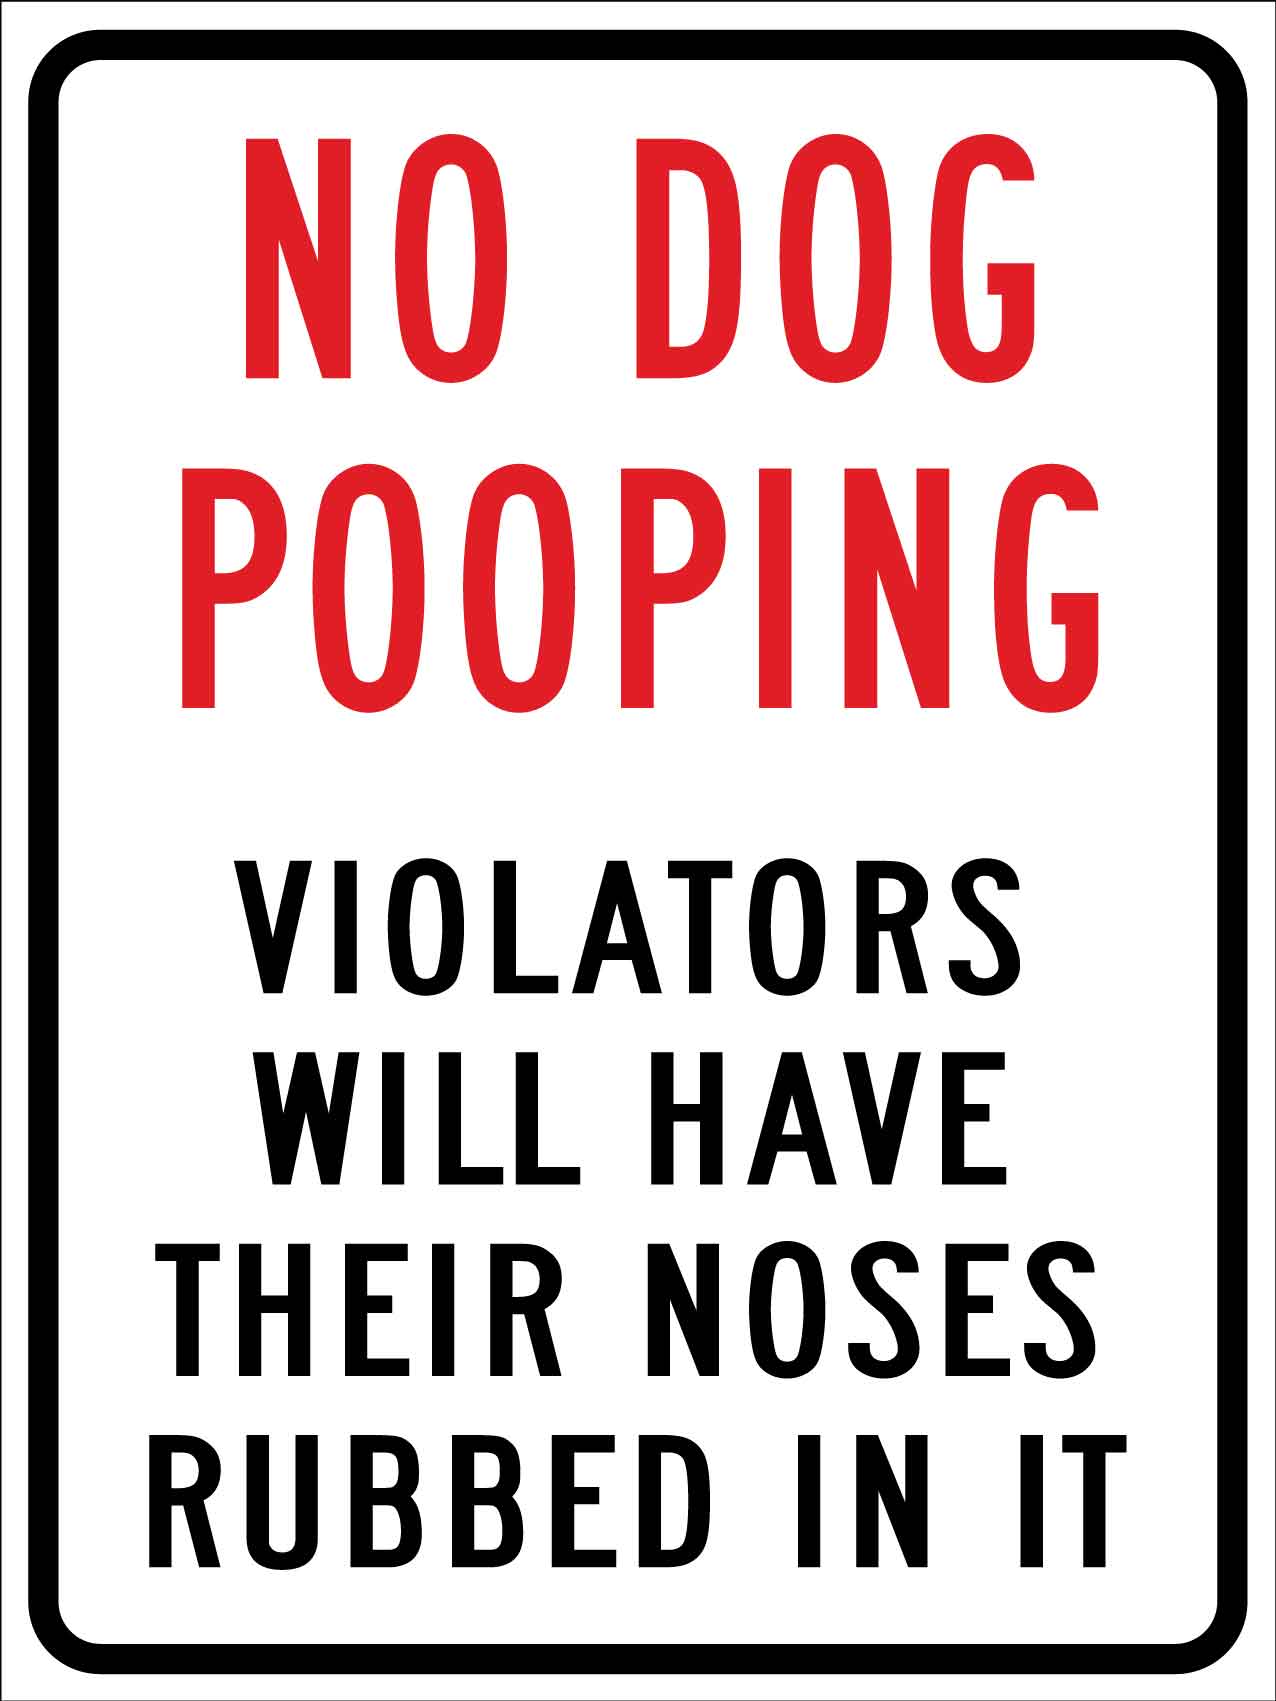 No Dog Pooping Violators Will Have Their Noses Rubbed In It Sign